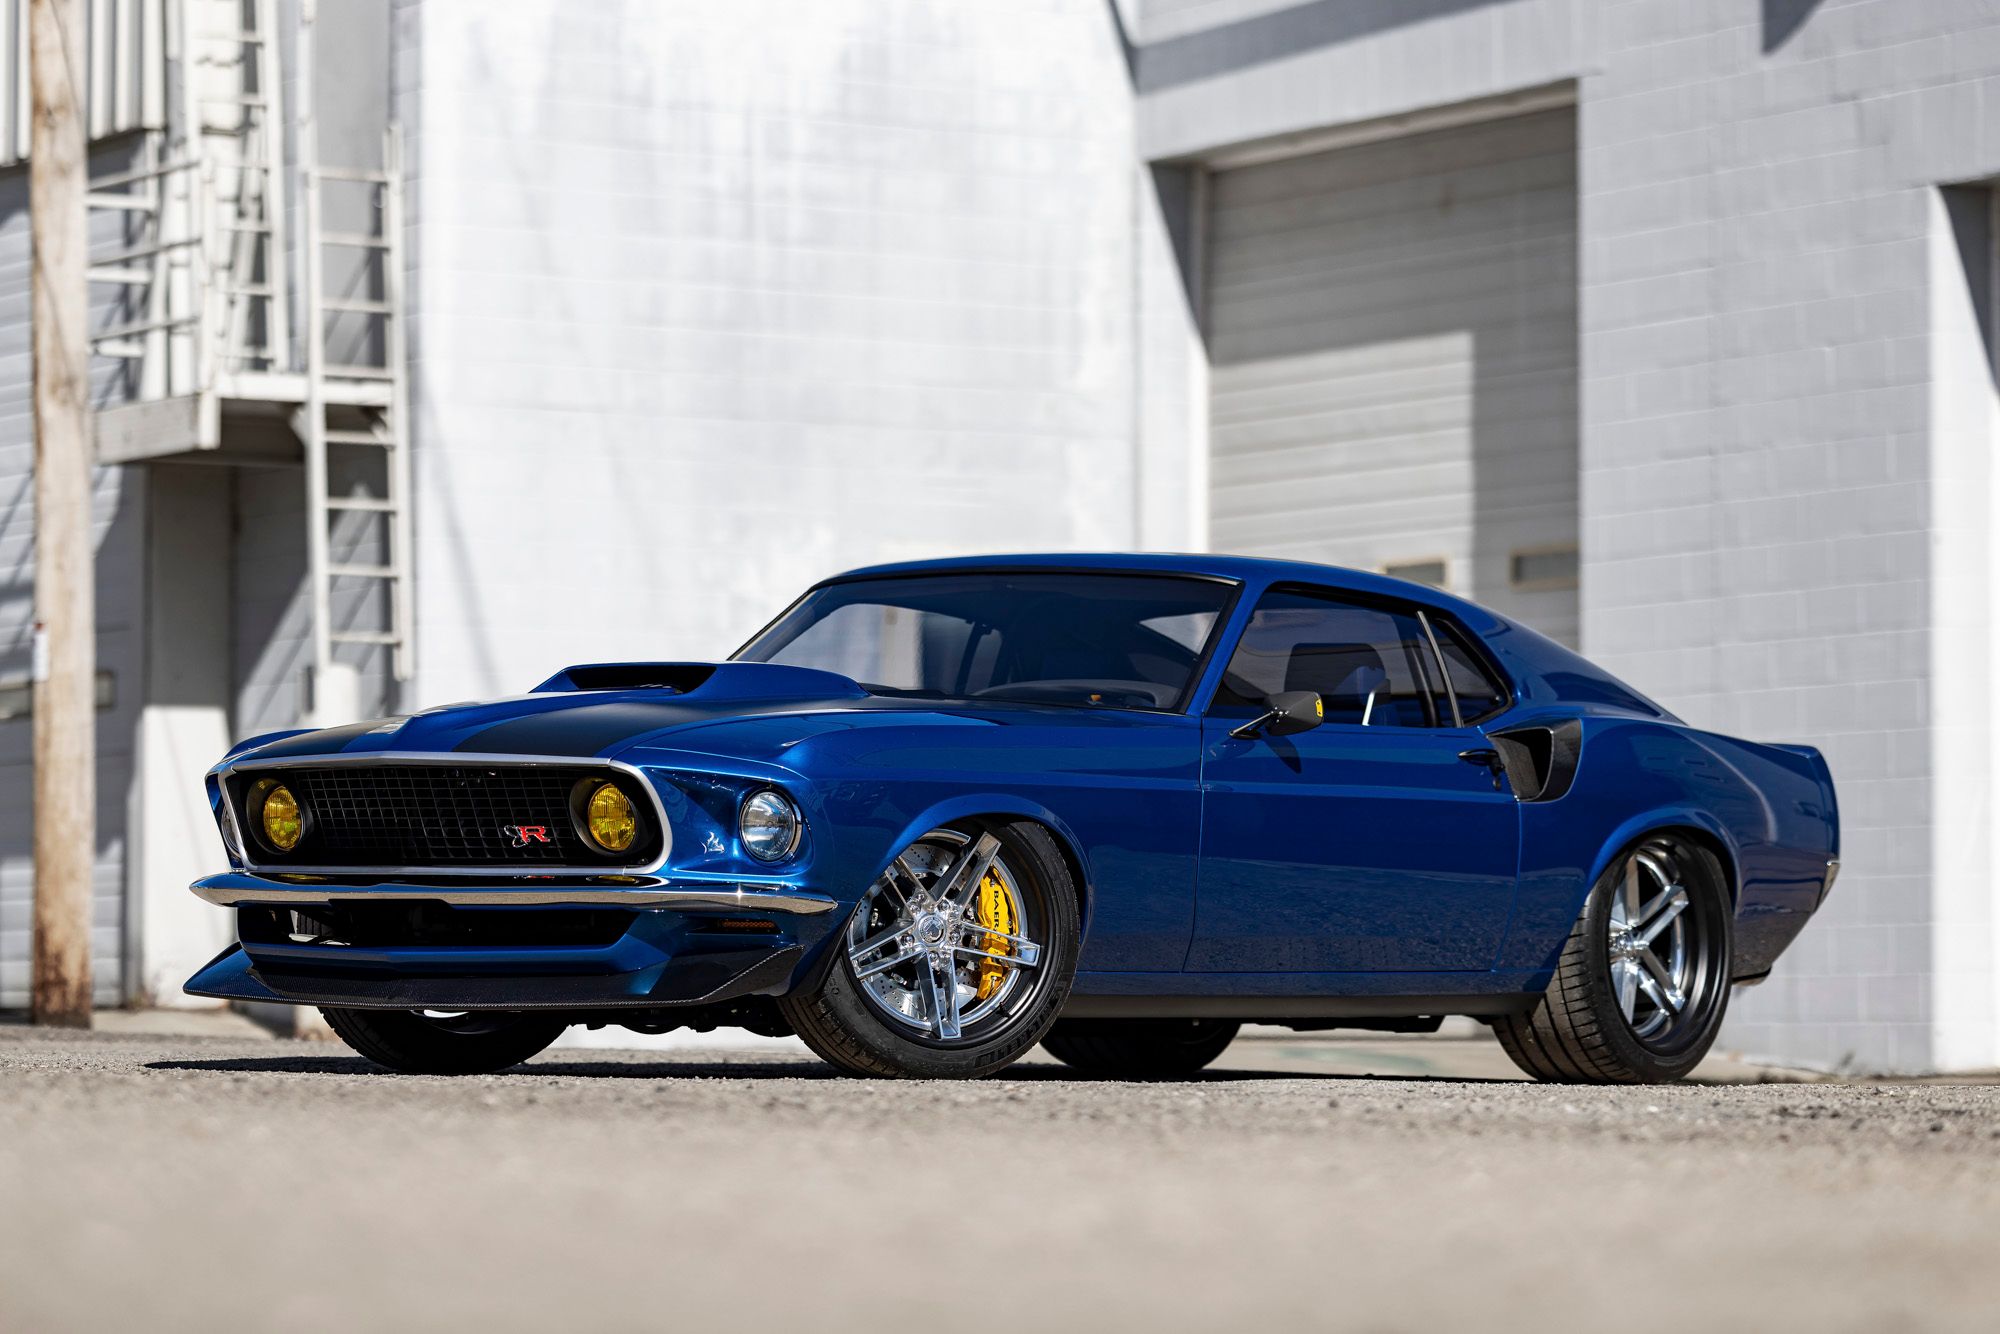 Ringbrothers Debuts Patriarc Based On 1969 Ford Mustang Mach 1